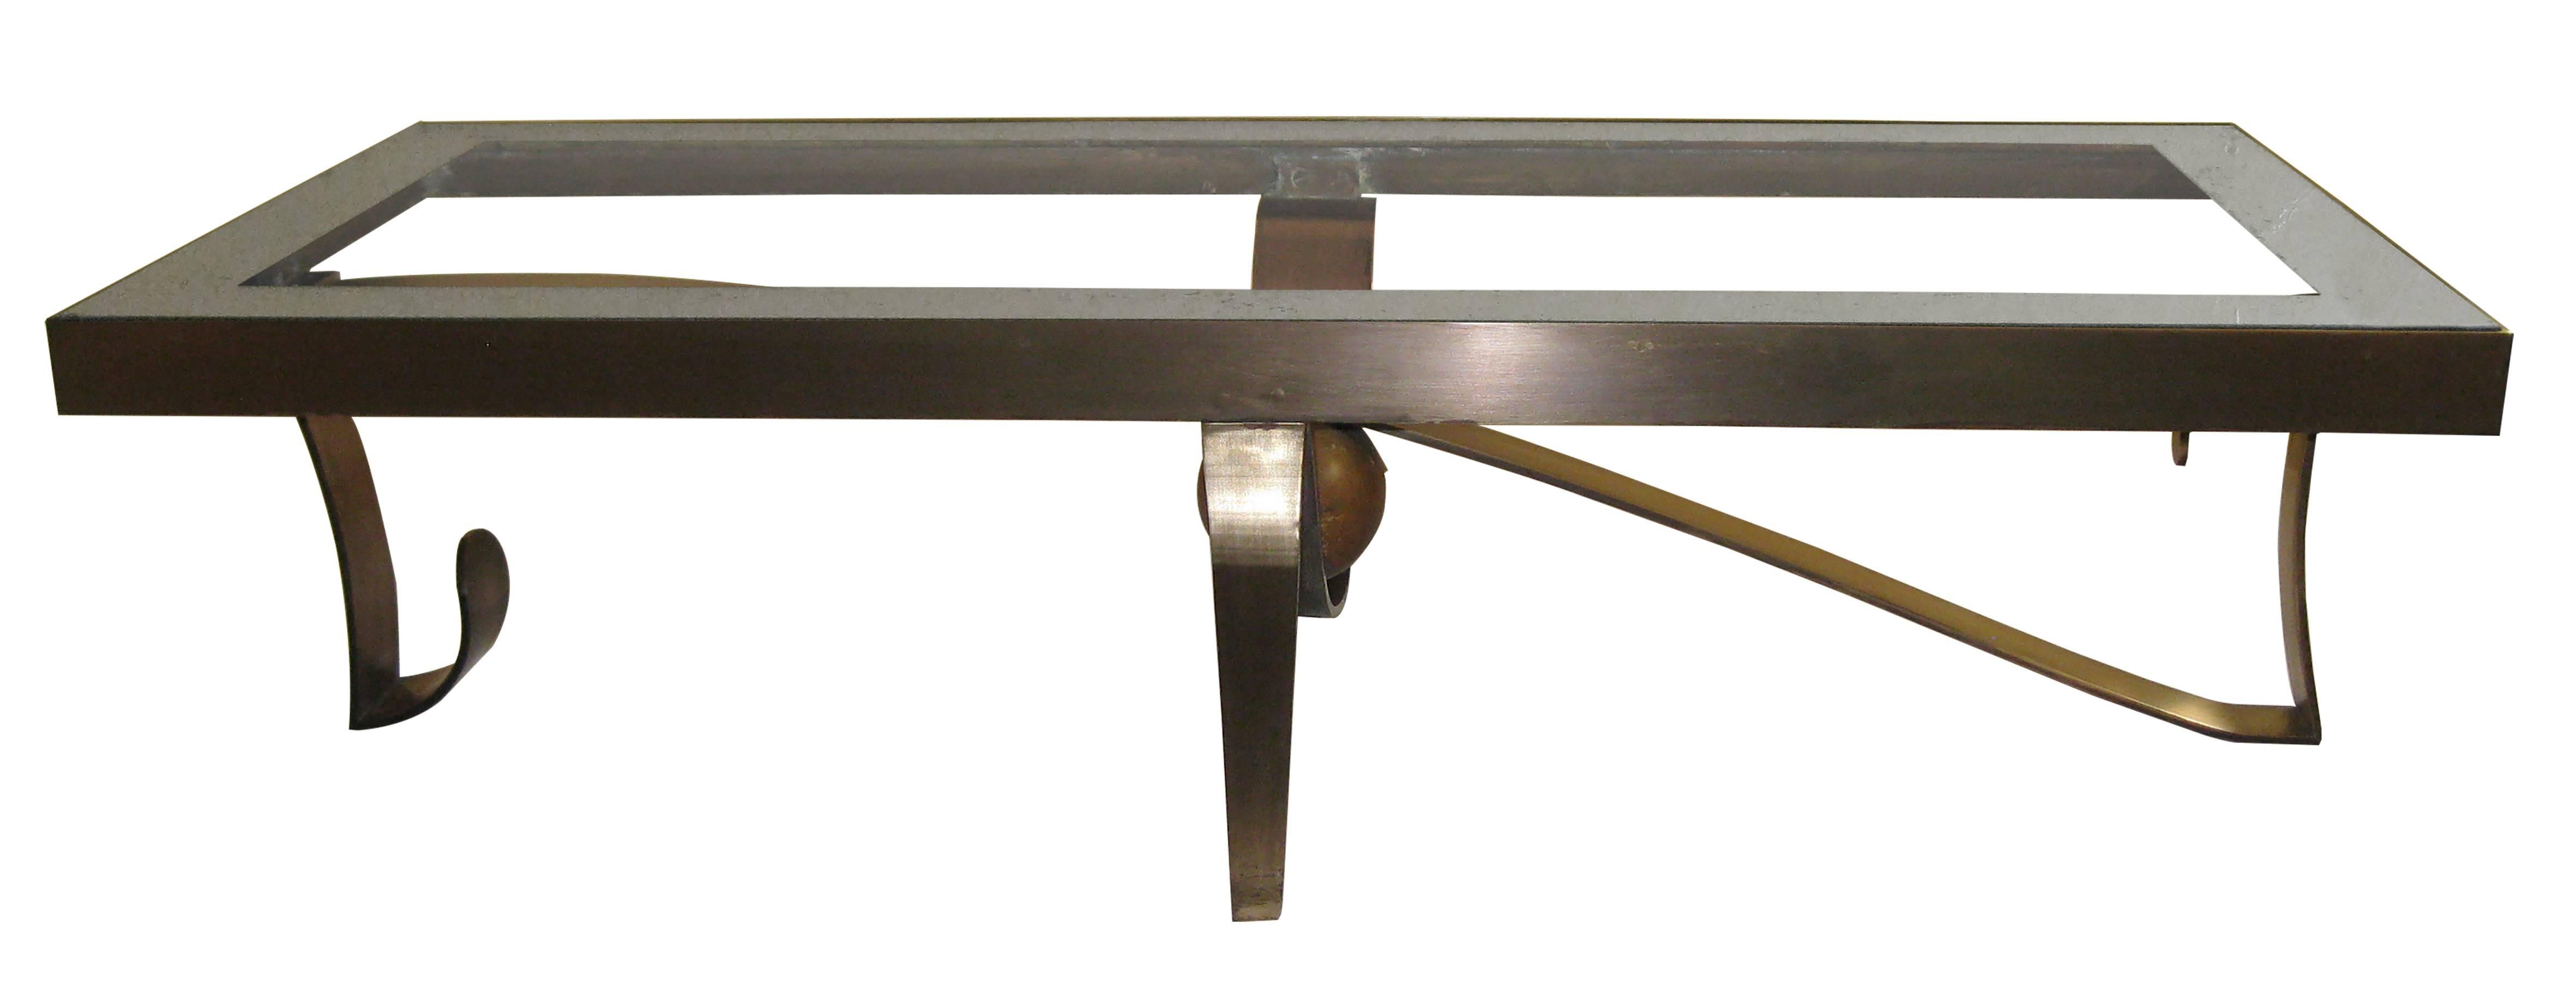 Mid-Century Modern Sculptural Coffee Table Designed by Roberto and Mito Block, circa 1950